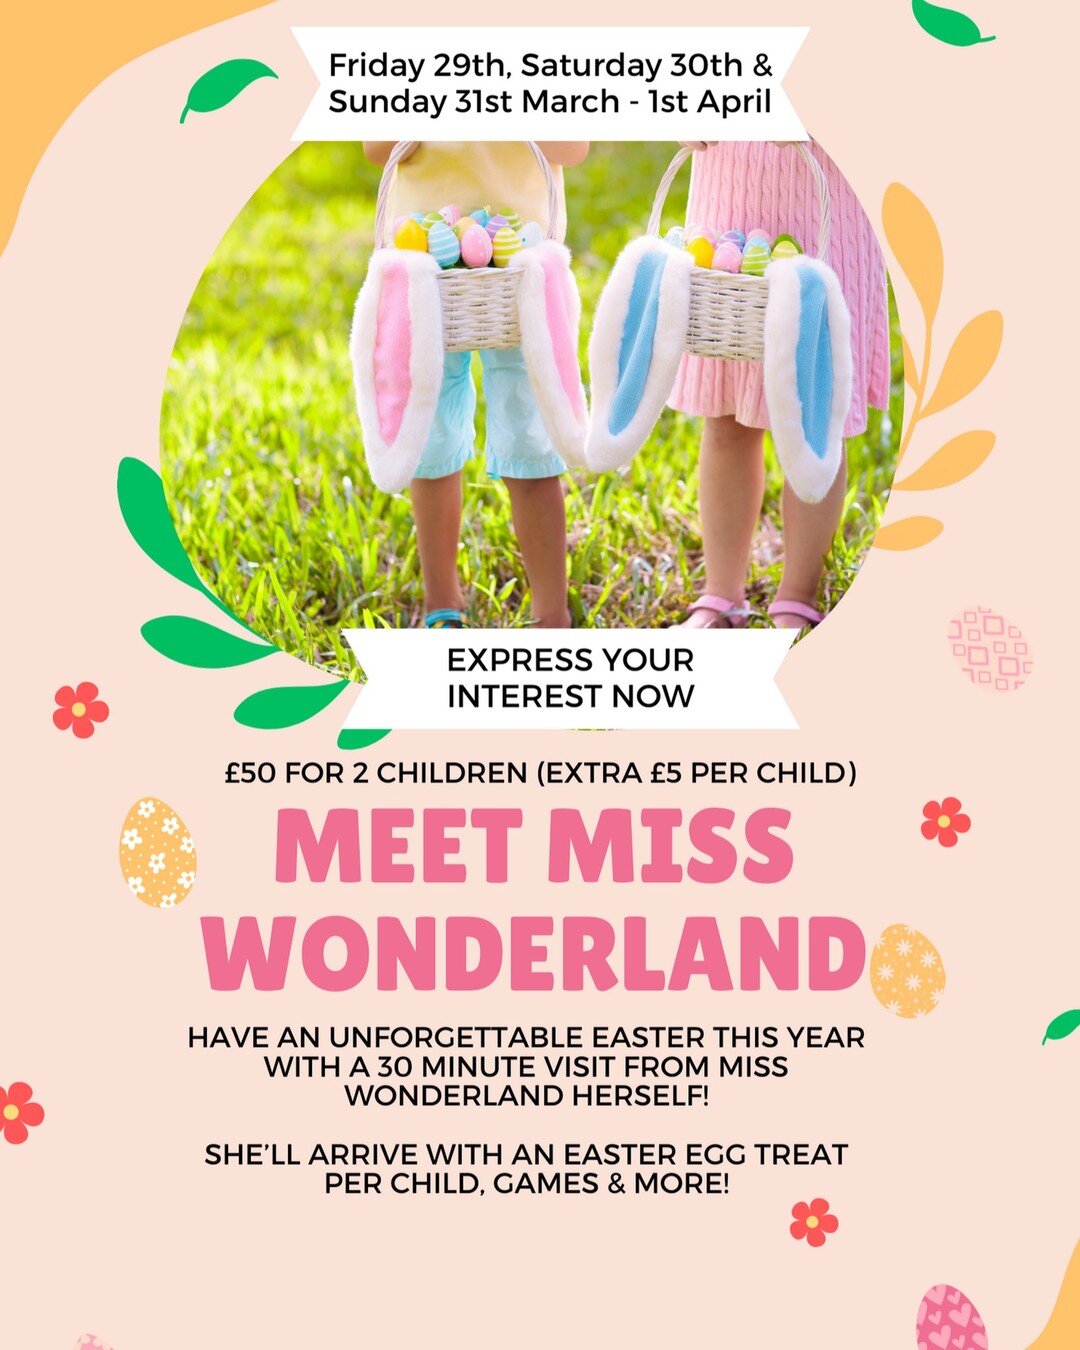 MEET &amp; GREET WITH MISS WONDERLAND THIS EASTER 🐣 please DM or email us if you are interested with a date in mind - we will then work out a route depending on the bookings and let you know what time she can be with you 💗 #easter #eastervisit #pri